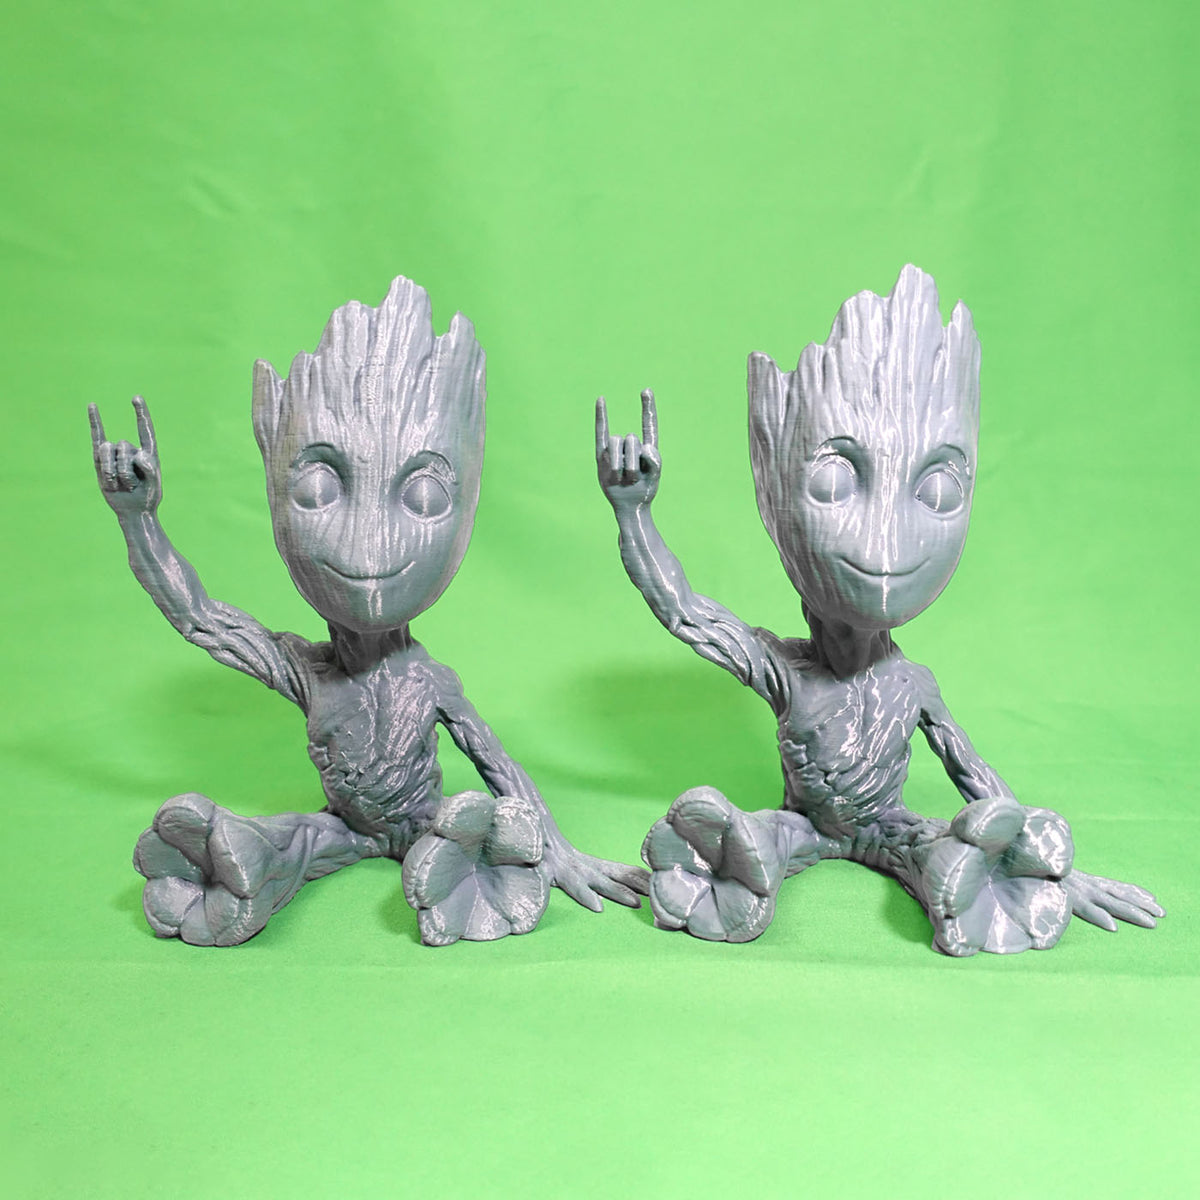 Groot printed on the Flashforge Guider 3